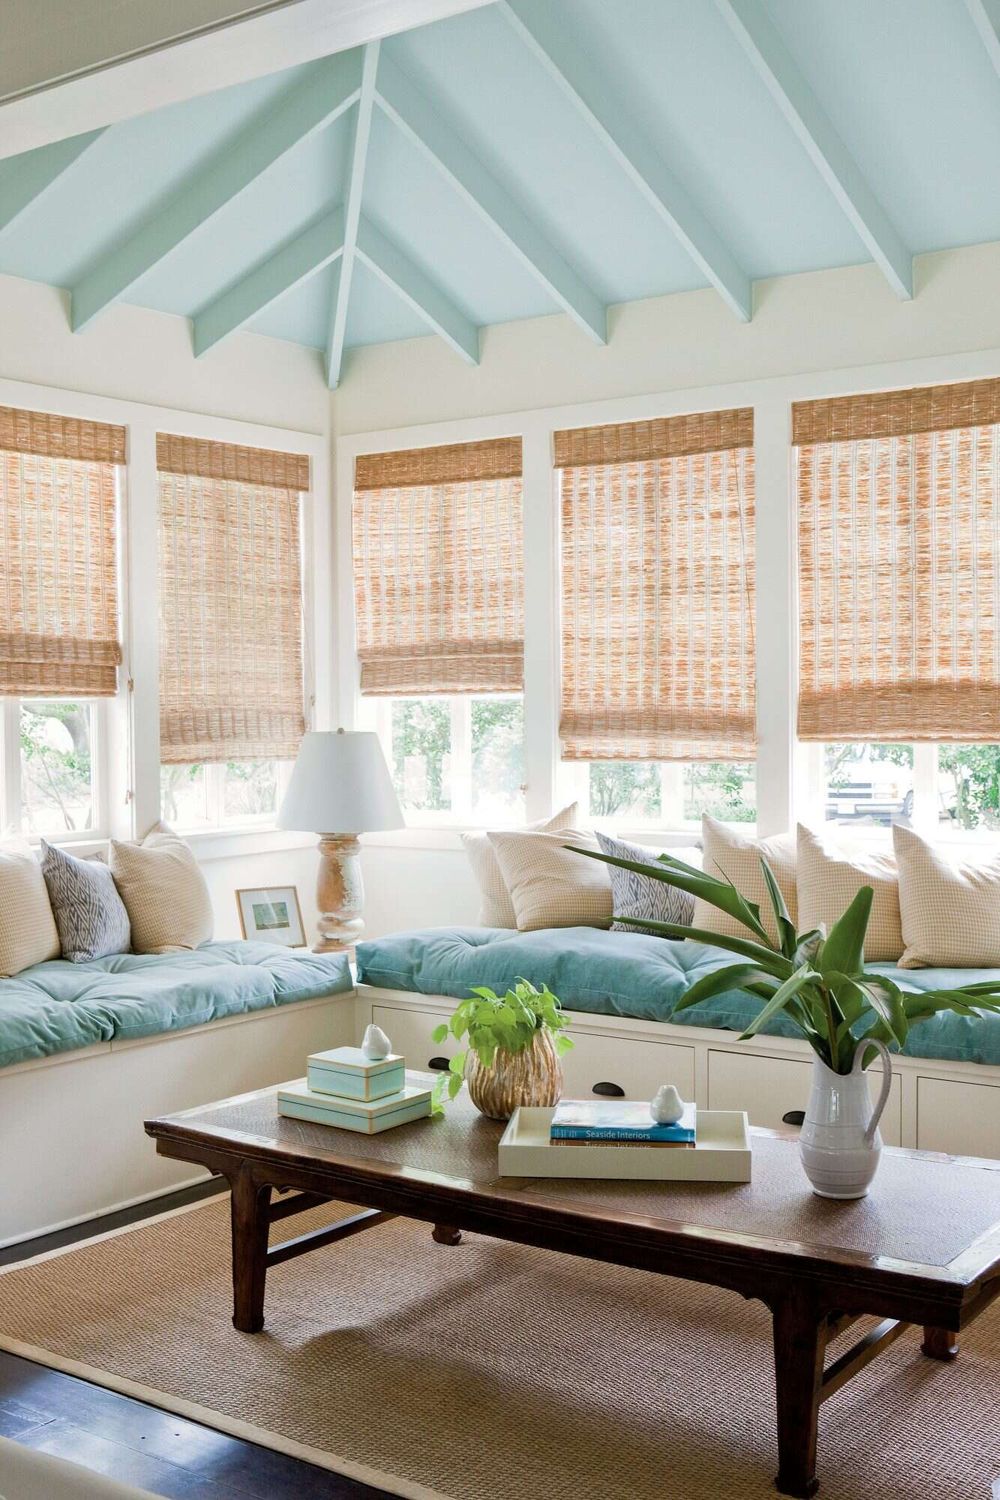 Sunroom ideas Built-in banquettes Bamboo shades southernliving mia james